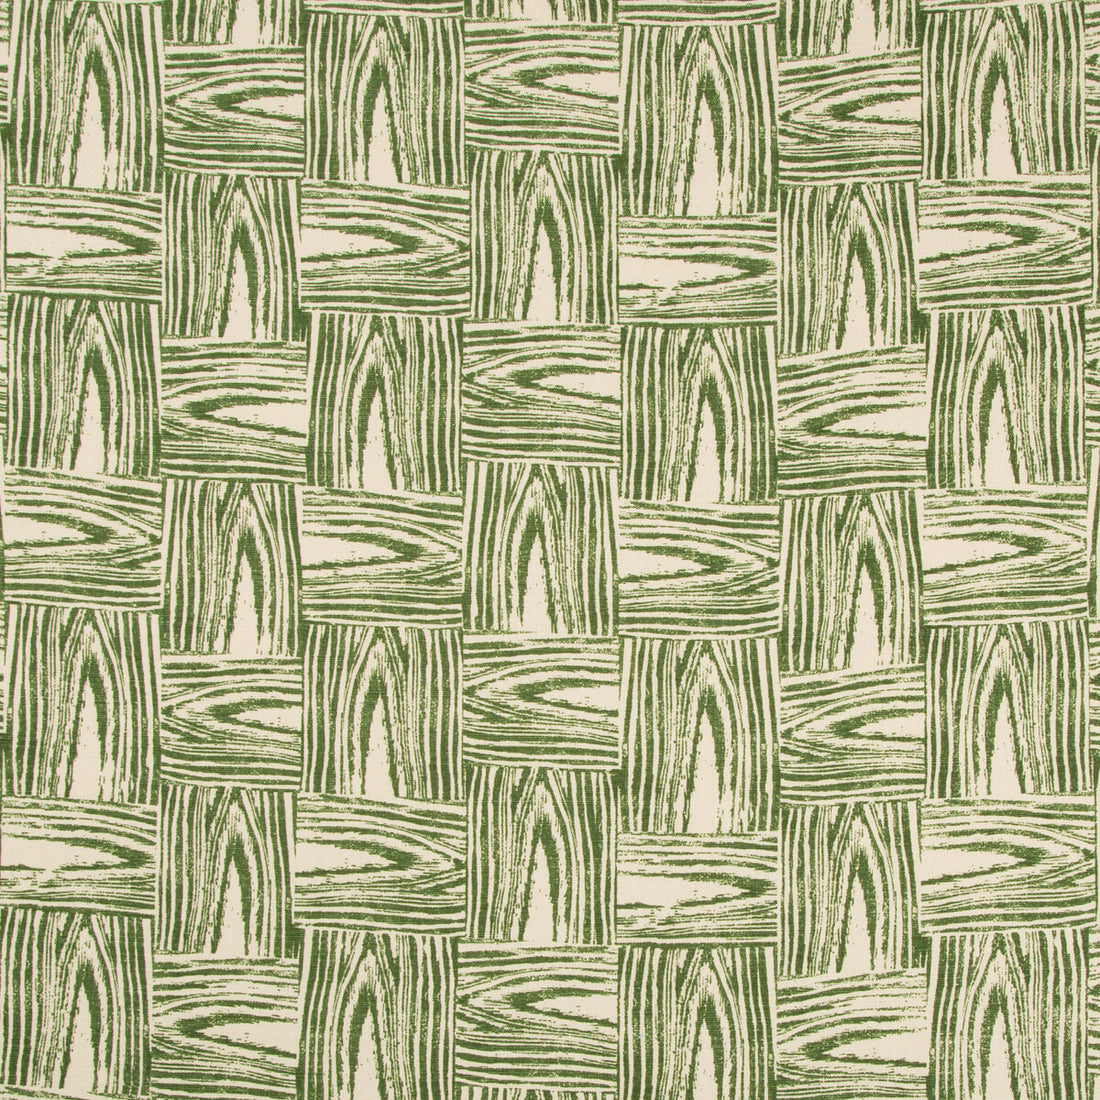 Timberline Print fabric in hunter color - pattern 2017135.3.0 - by Lee Jofa in the Lodge II Prints collection